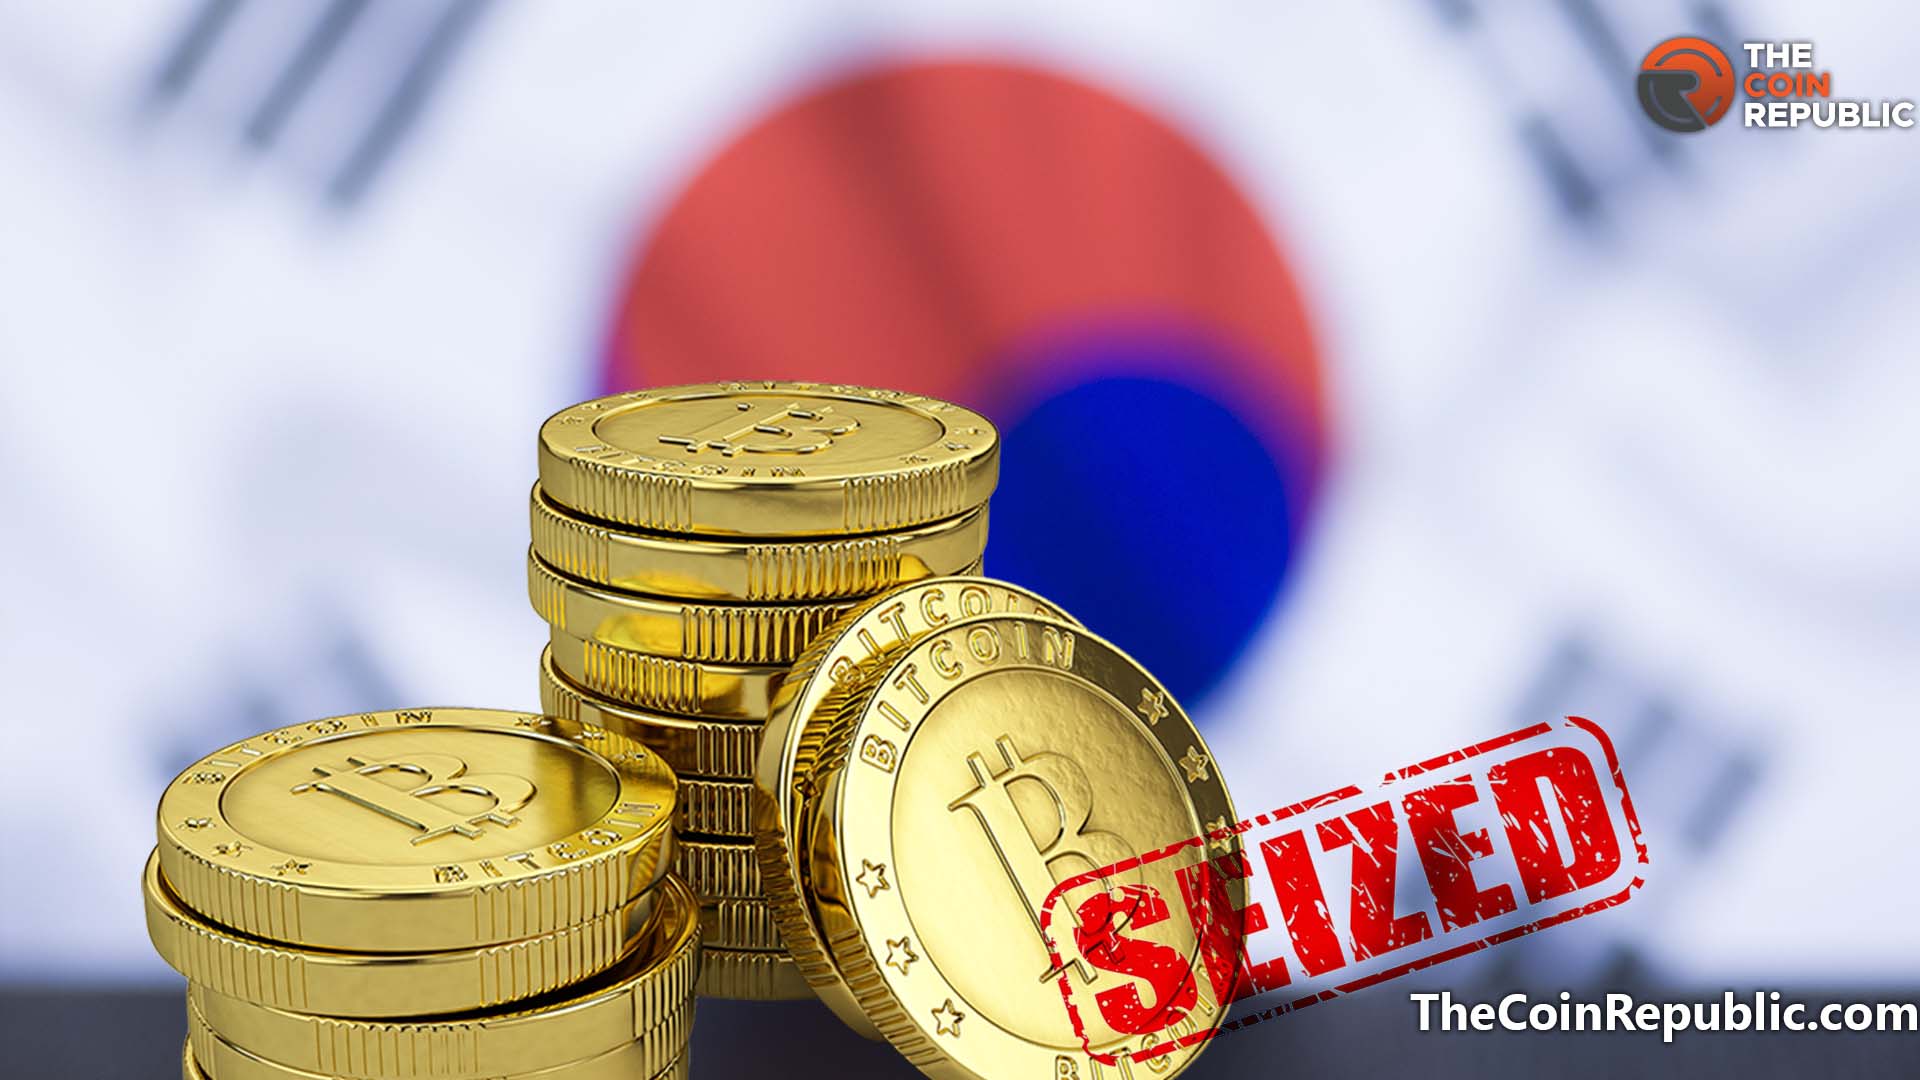 Due To Unpaid Taxes, The Republic Of Korea Seized 4 Million (USD) In Virtual Assets